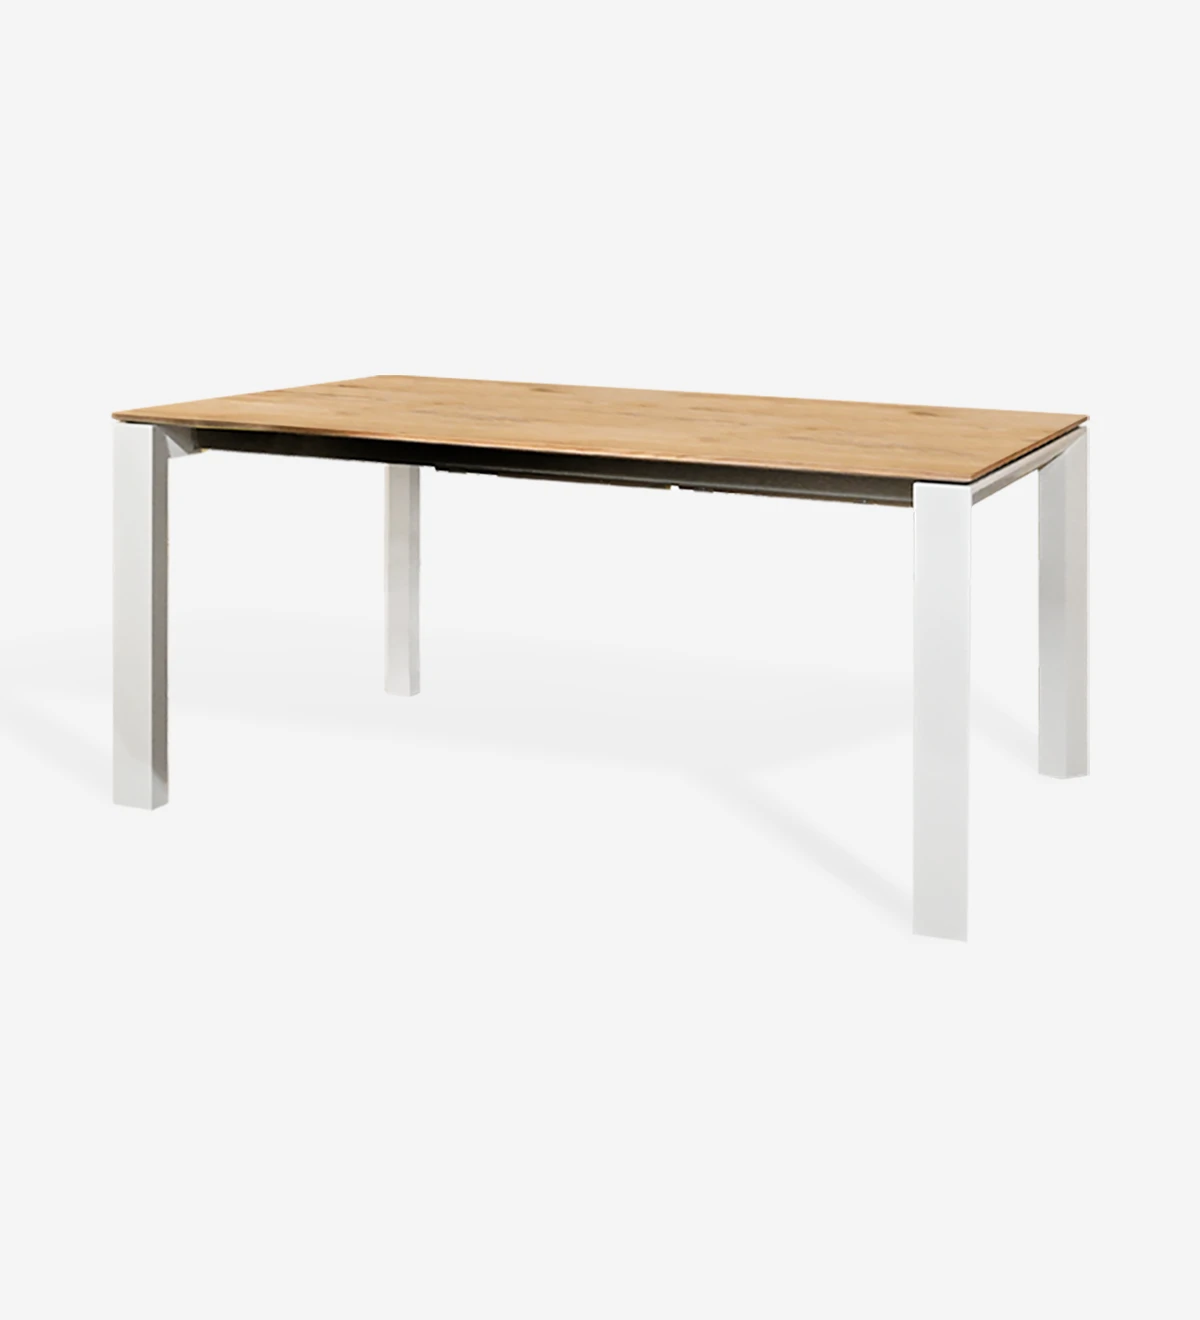 Rectangular extendable dining table with natural oak top, pearl lacquered metal legs.